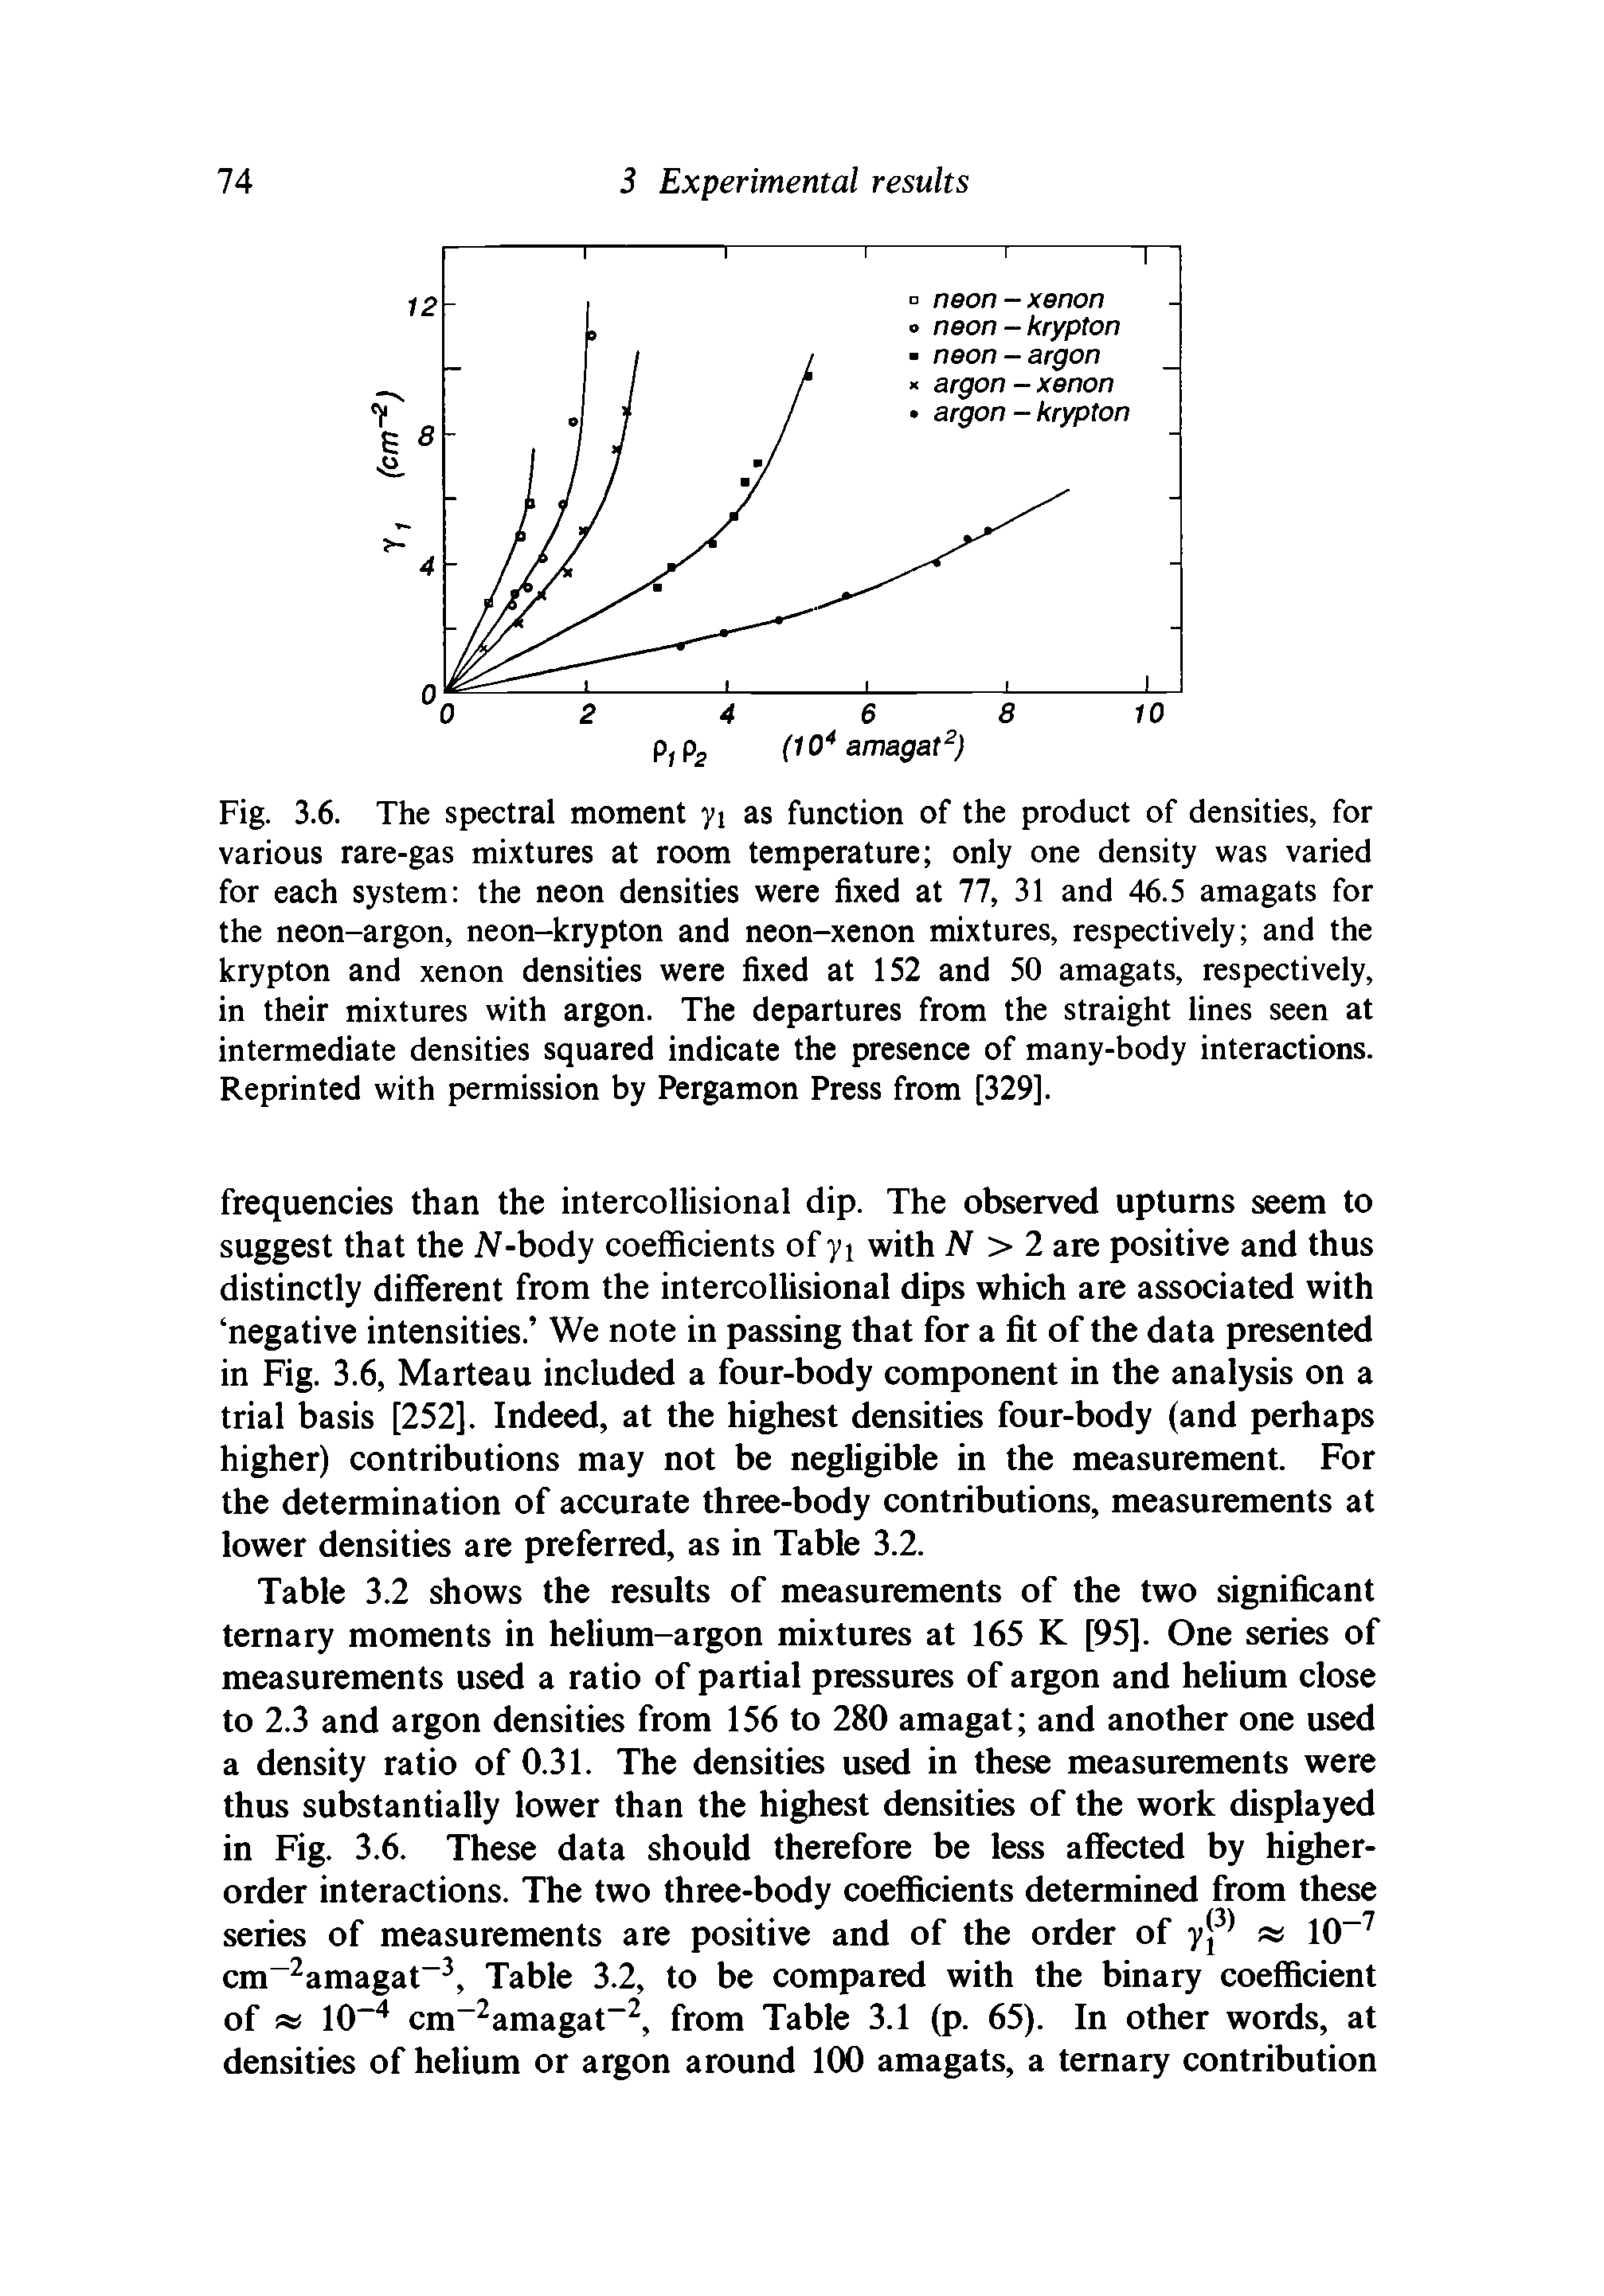 Fig. 3.6. The spectral moment y as function of the product of densities, for various rare-gas mixtures at room temperature only one density was varied for each system the neon densities were fixed at 77, 31 and 46.5 amagats for the neon-argon, neon-krypton and neon-xenon mixtures, respectively and the krypton and xenon densities were fixed at 152 and 50 amagats, respectively, in their mixtures with argon. The departures from the straight lines seen at intermediate densities squared indicate the presence of many-body interactions. Reprinted with permission by Pergamon Press from [329].